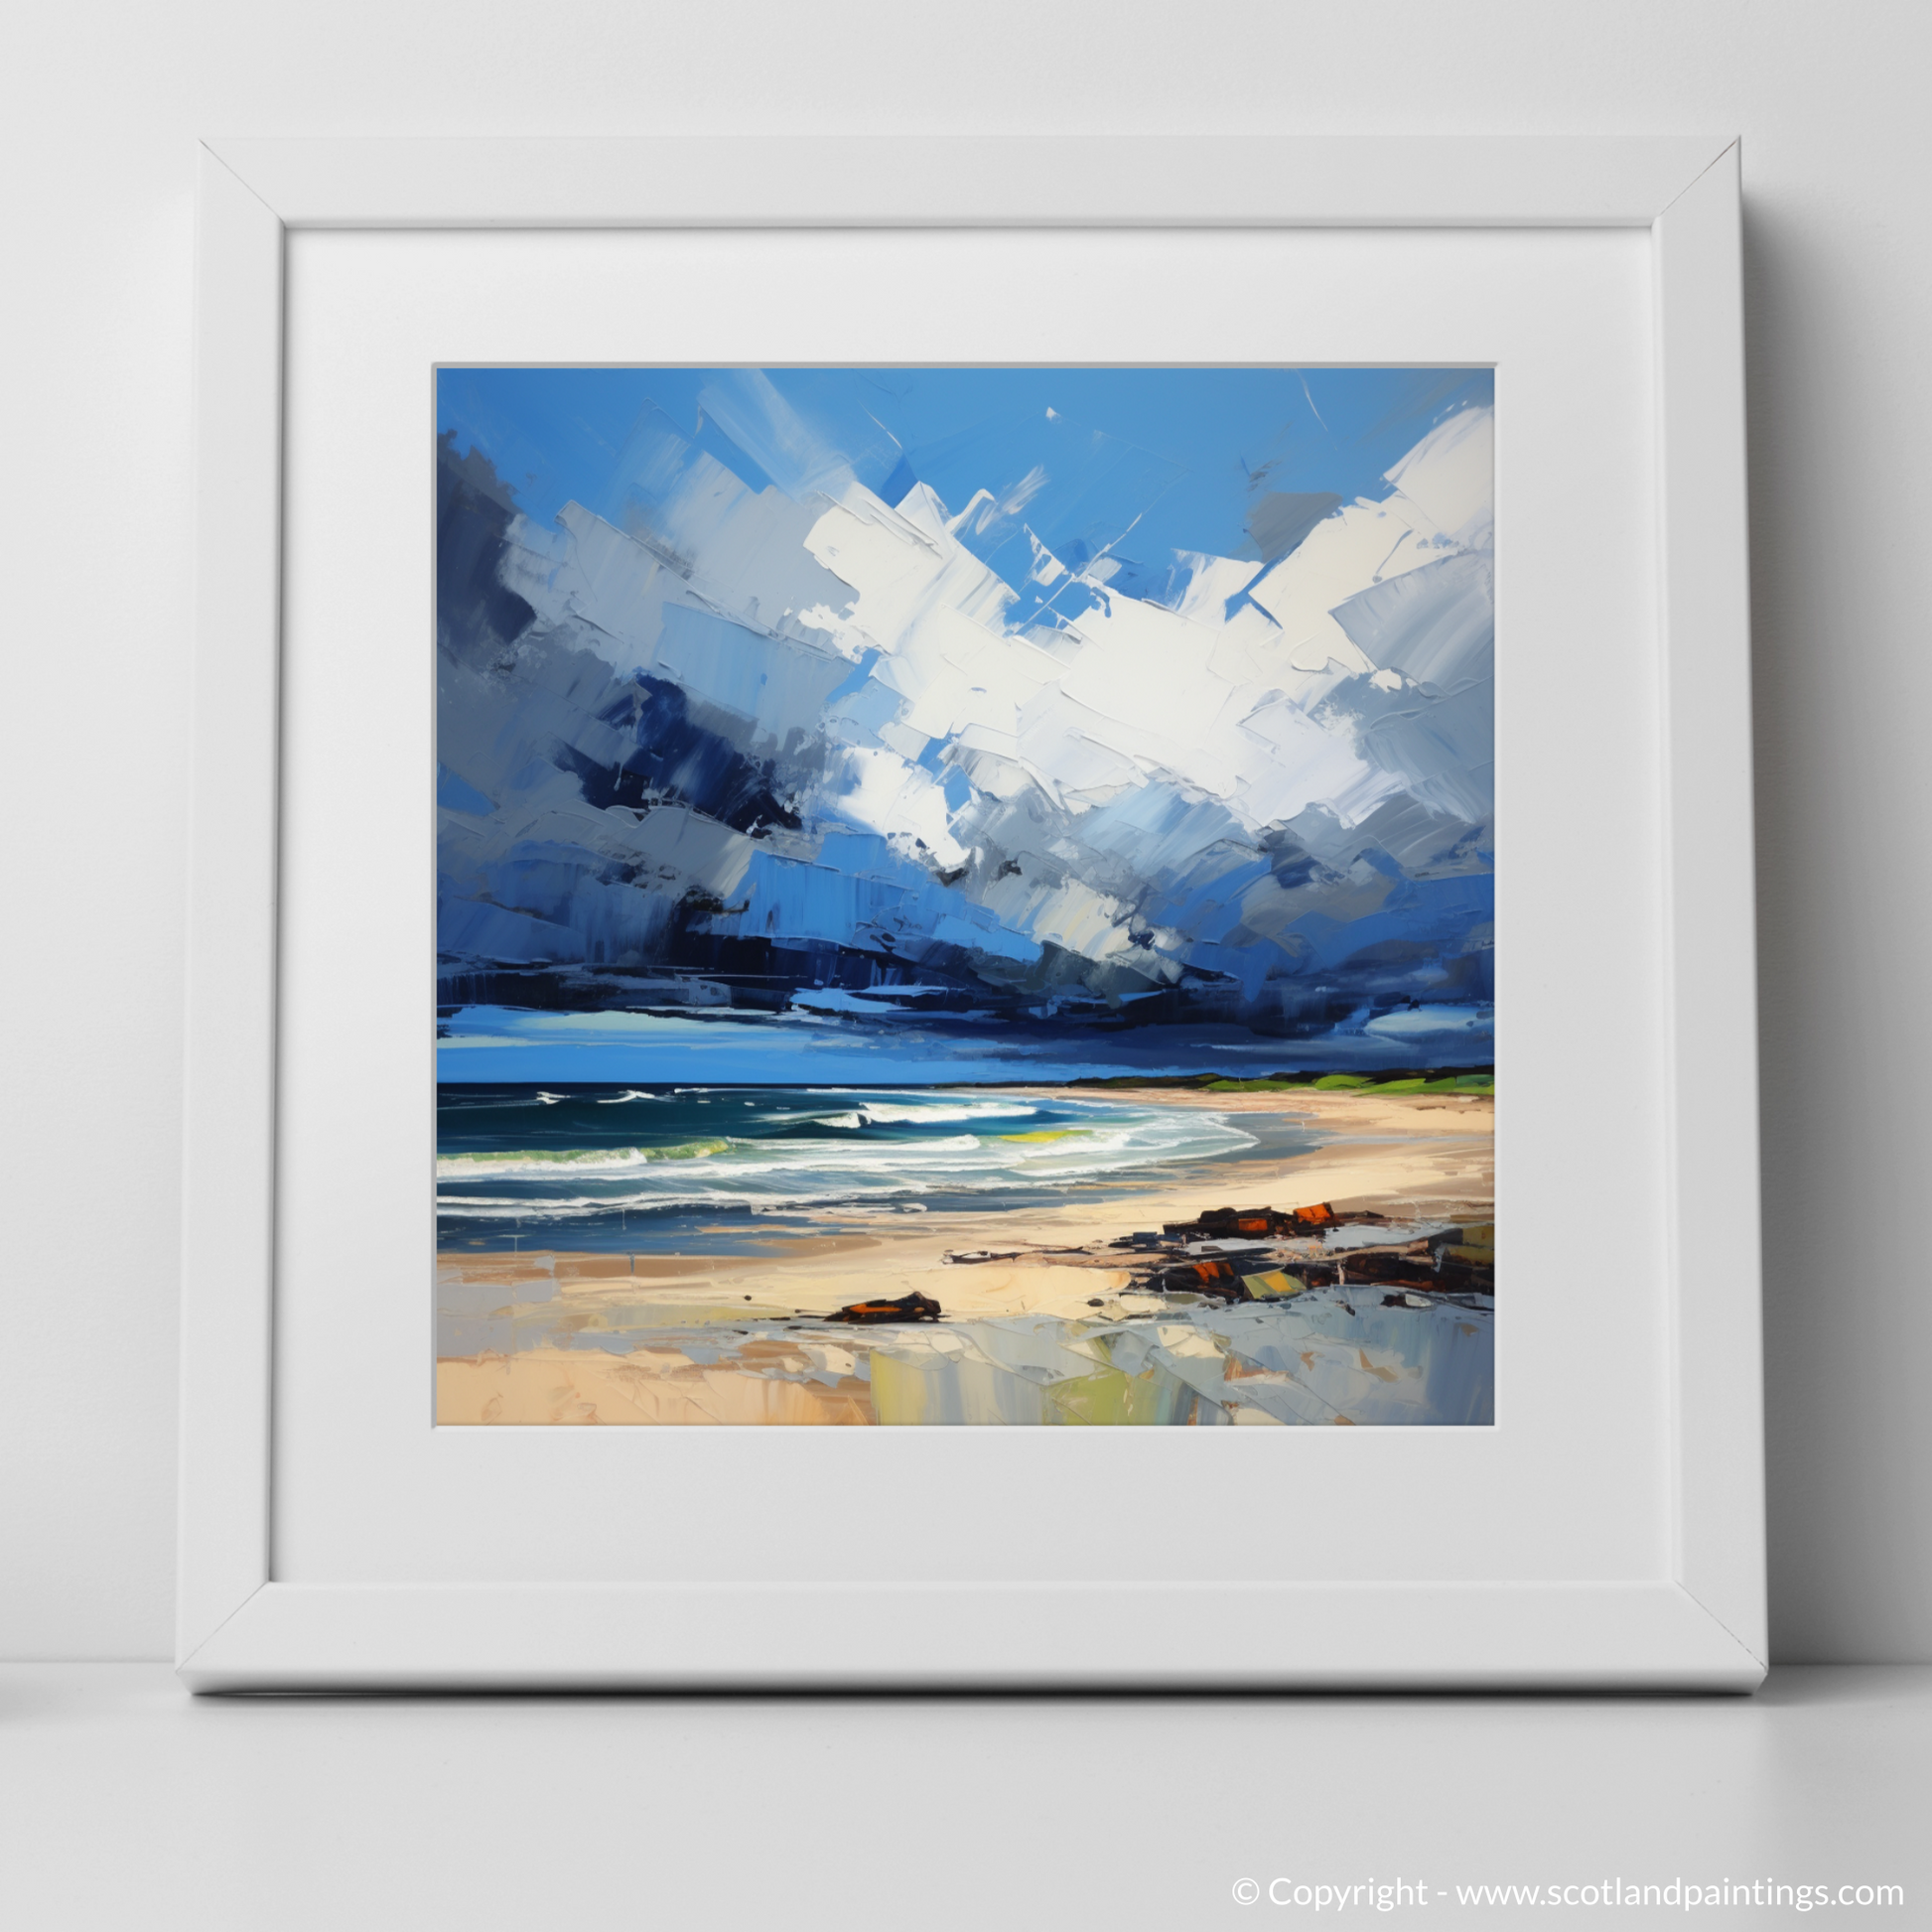 Art Print of Gullane Beach with a stormy sky with a white frame